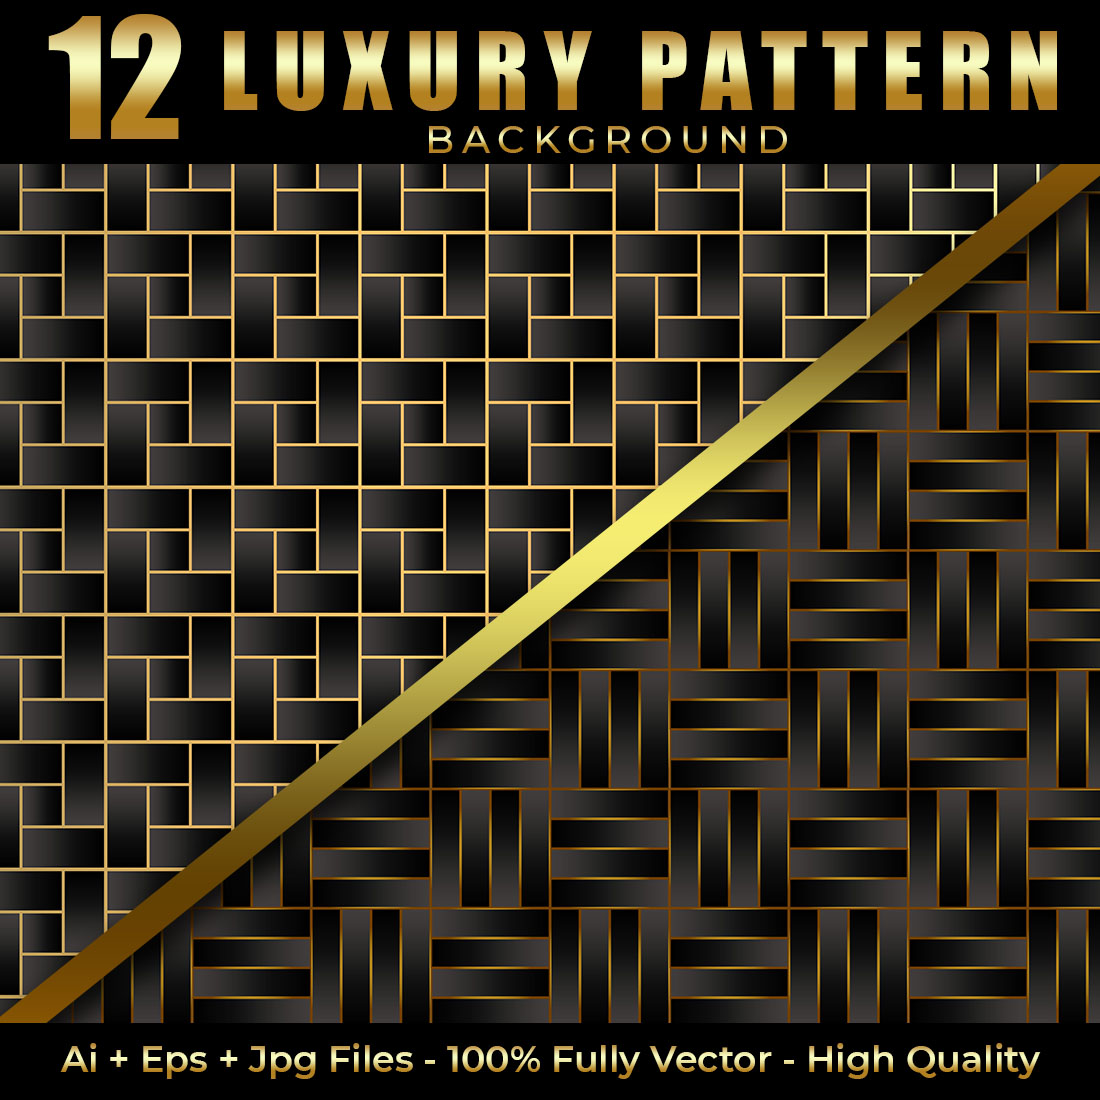 Luxury Pattern Background Collection cover image.